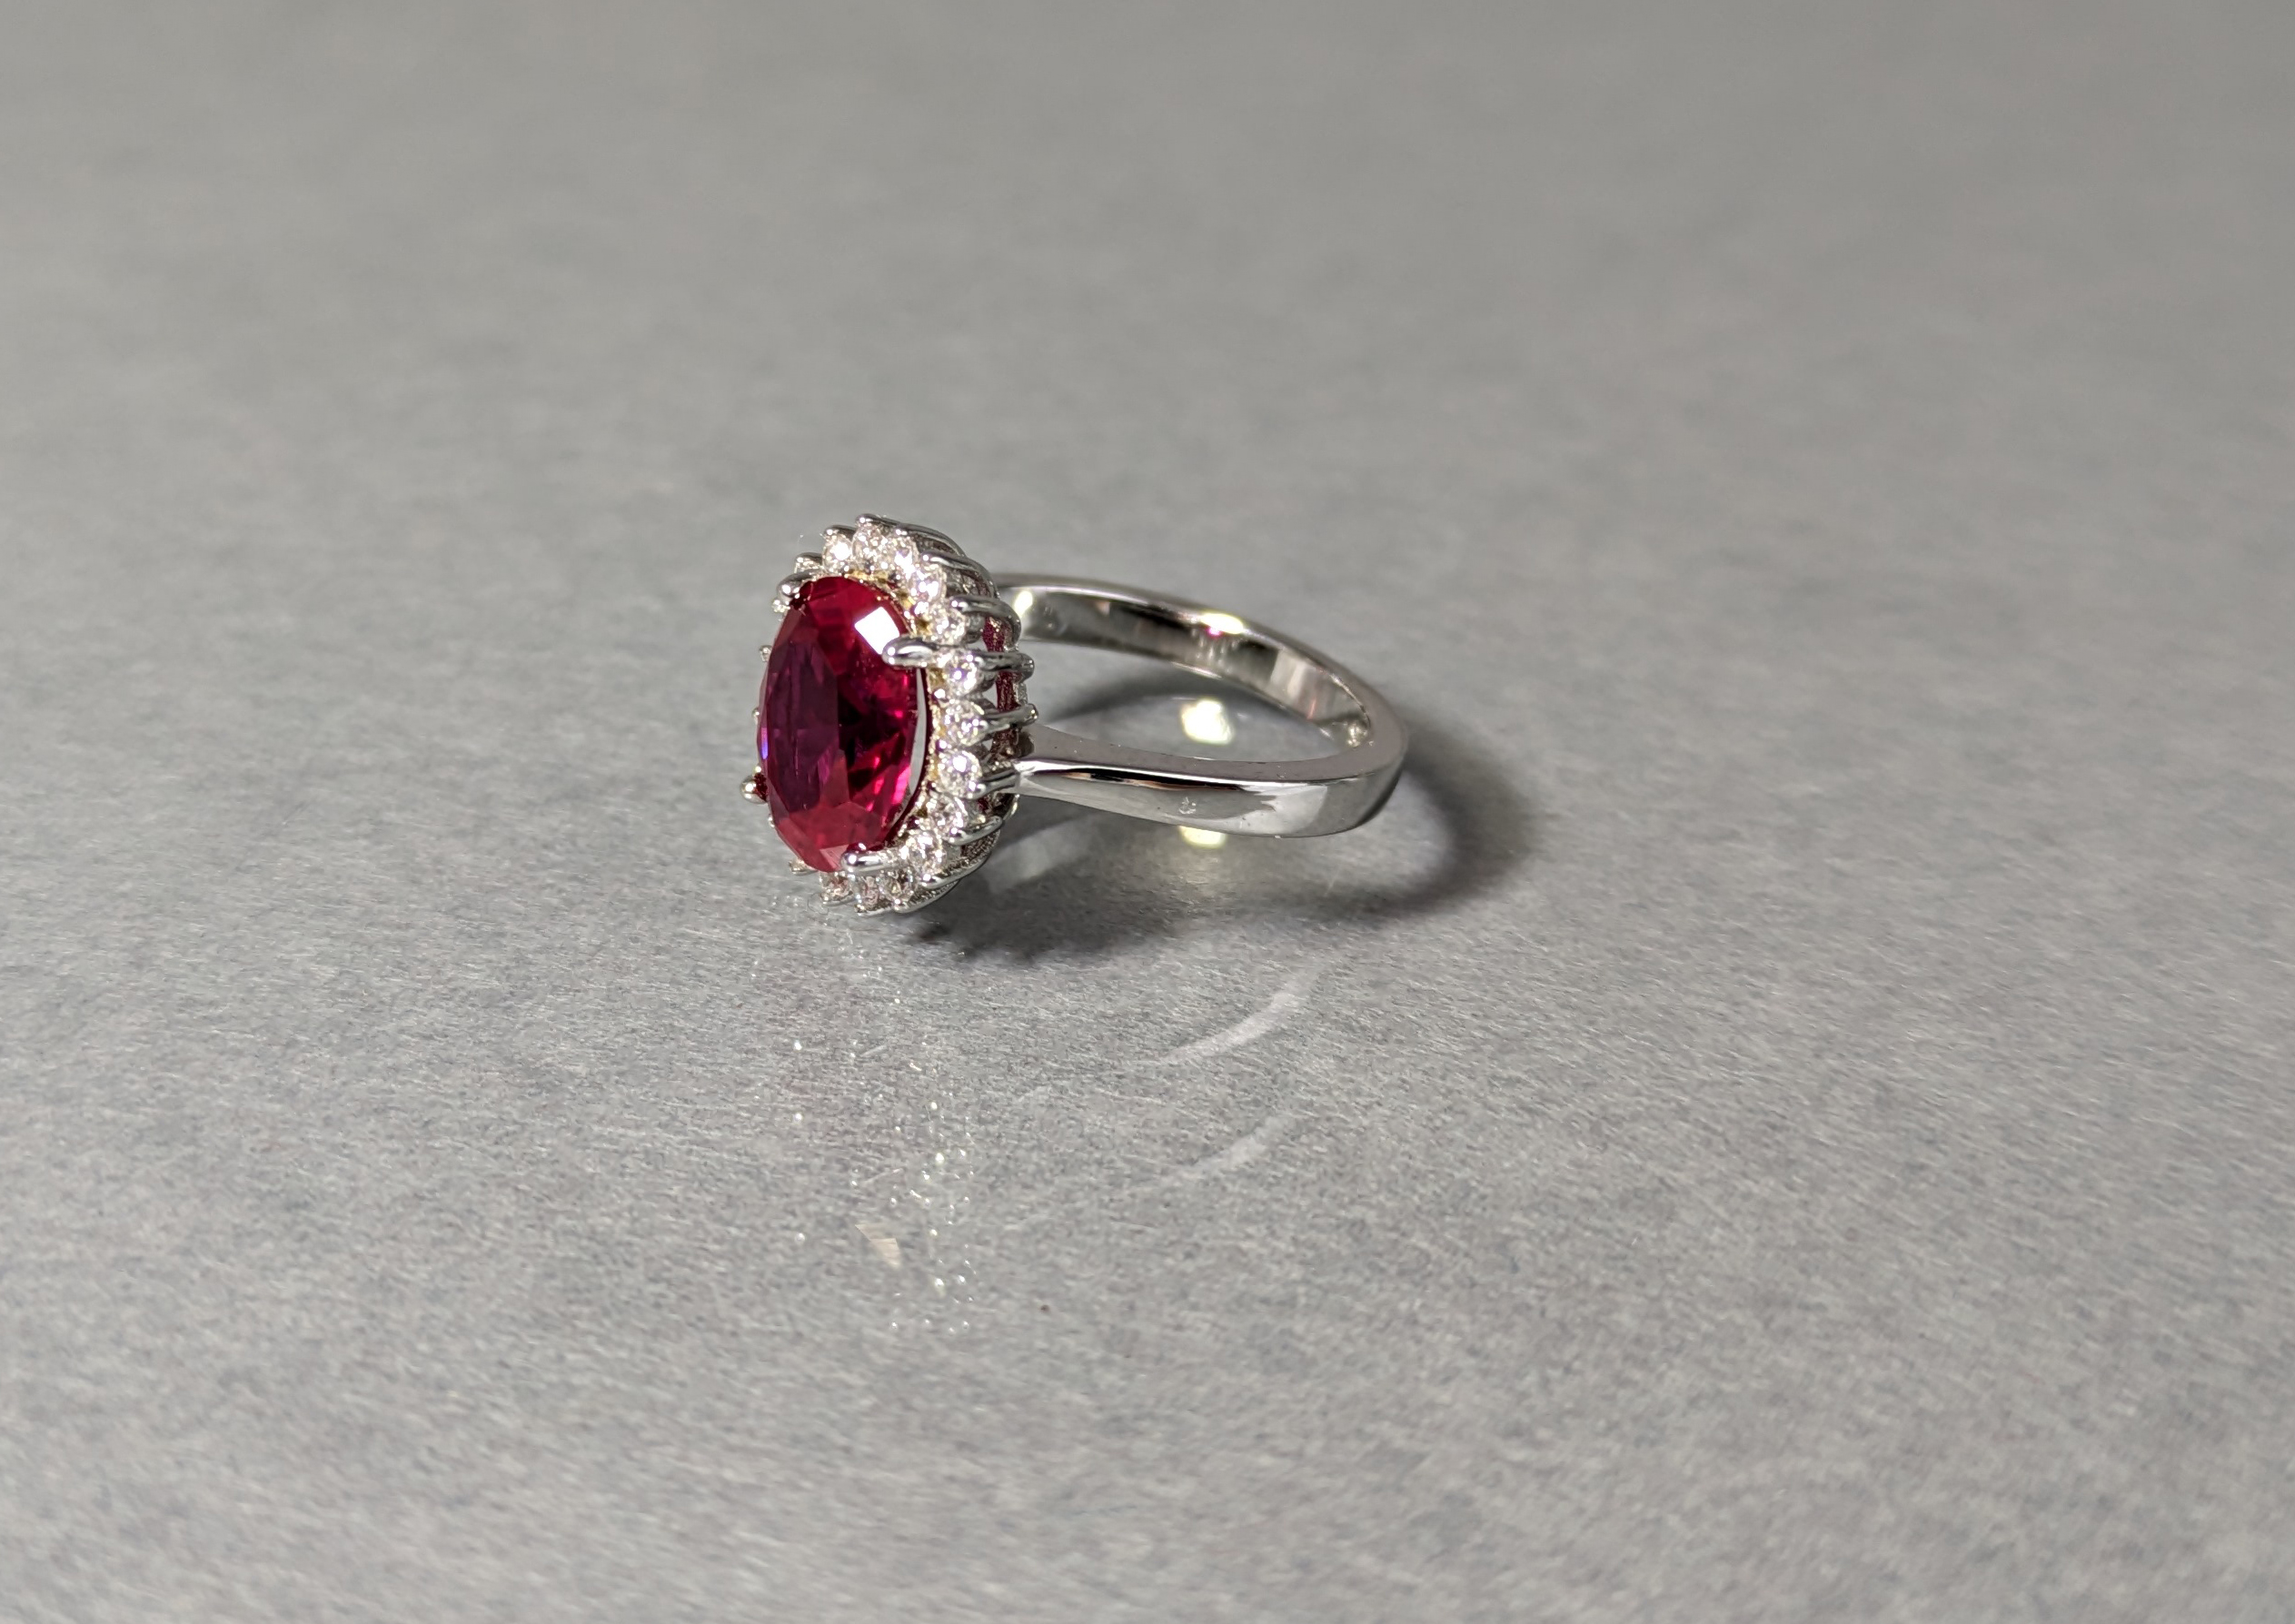 A dress ring set oval-cut cubic zirconium of deep red colour, within a border of small white stones, - Image 2 of 3